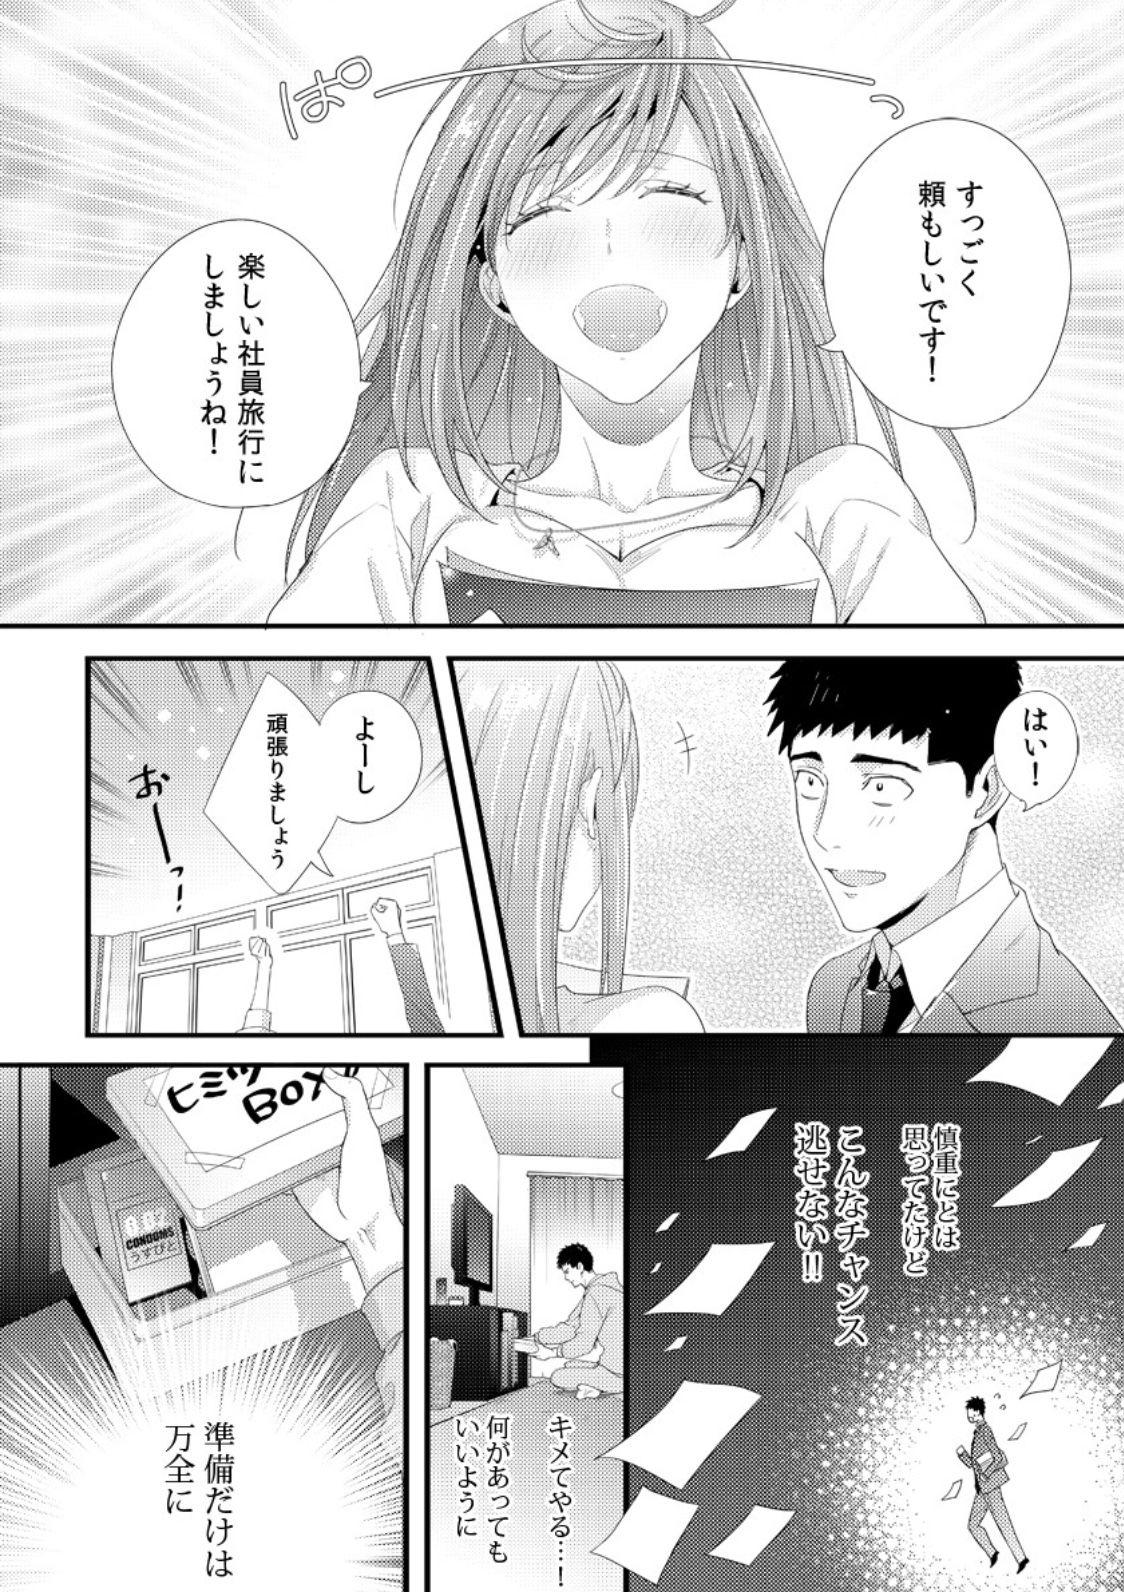 Please Let Me Hold You Futaba-San! Ch. 1+2 7